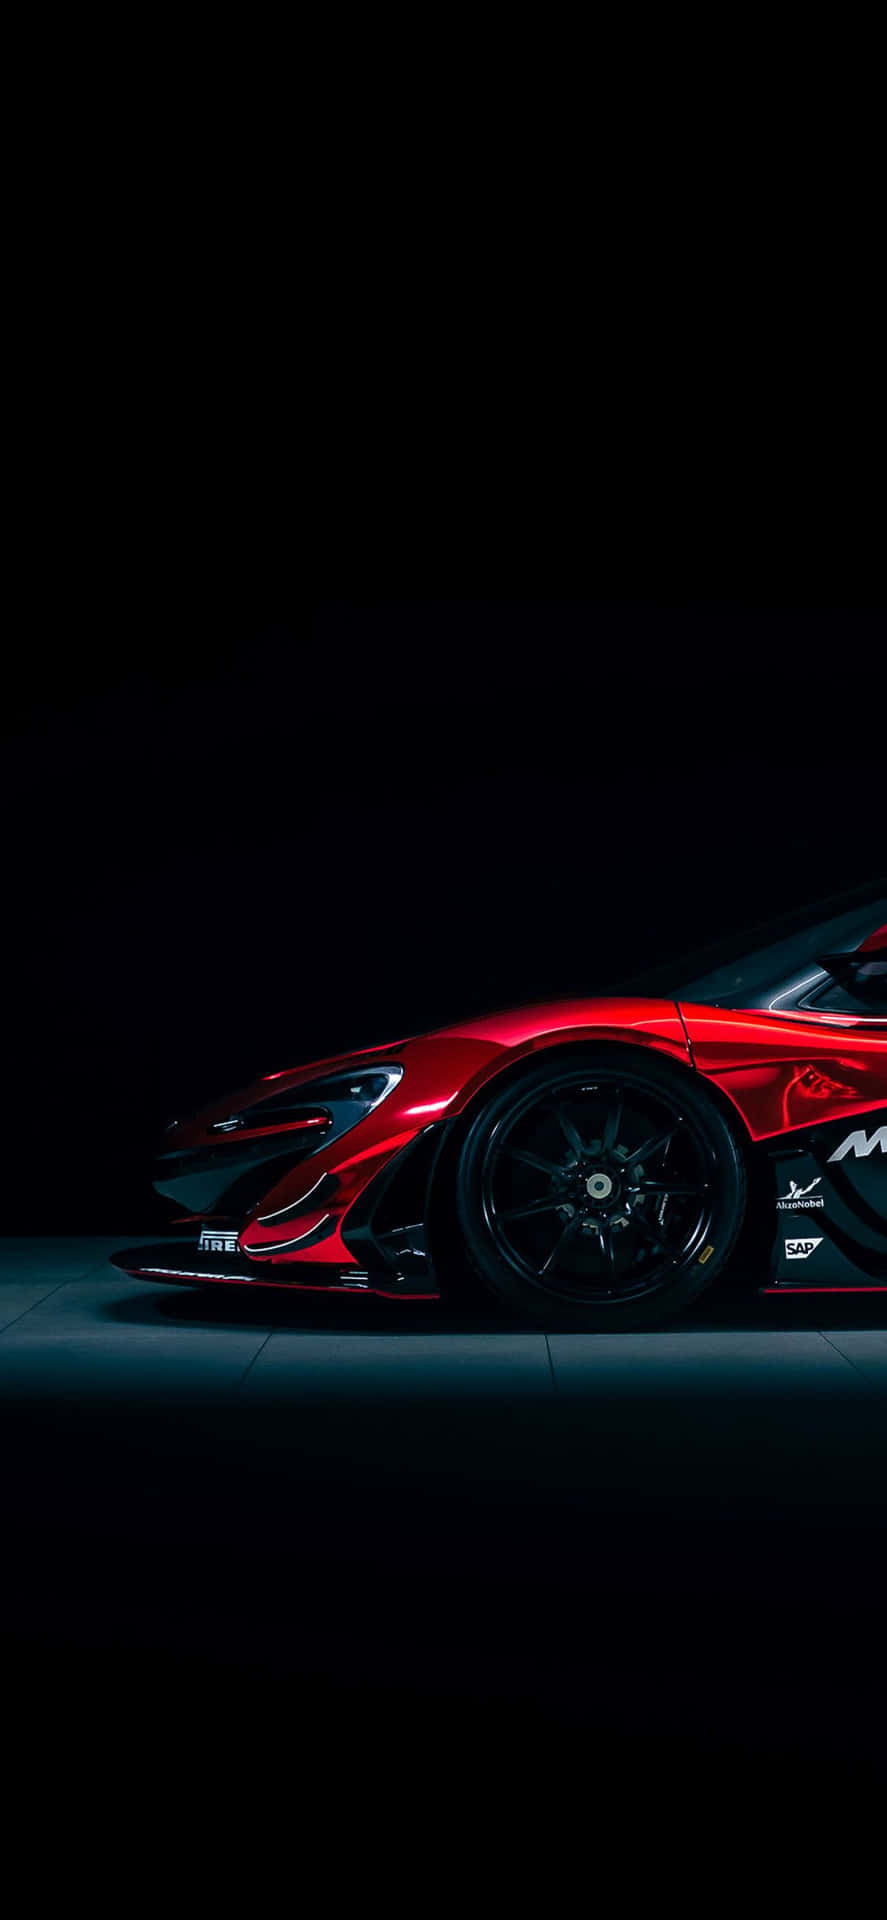 Iphone Xs Max Project Cars 2 Red Mclaren P1 Gtr Background